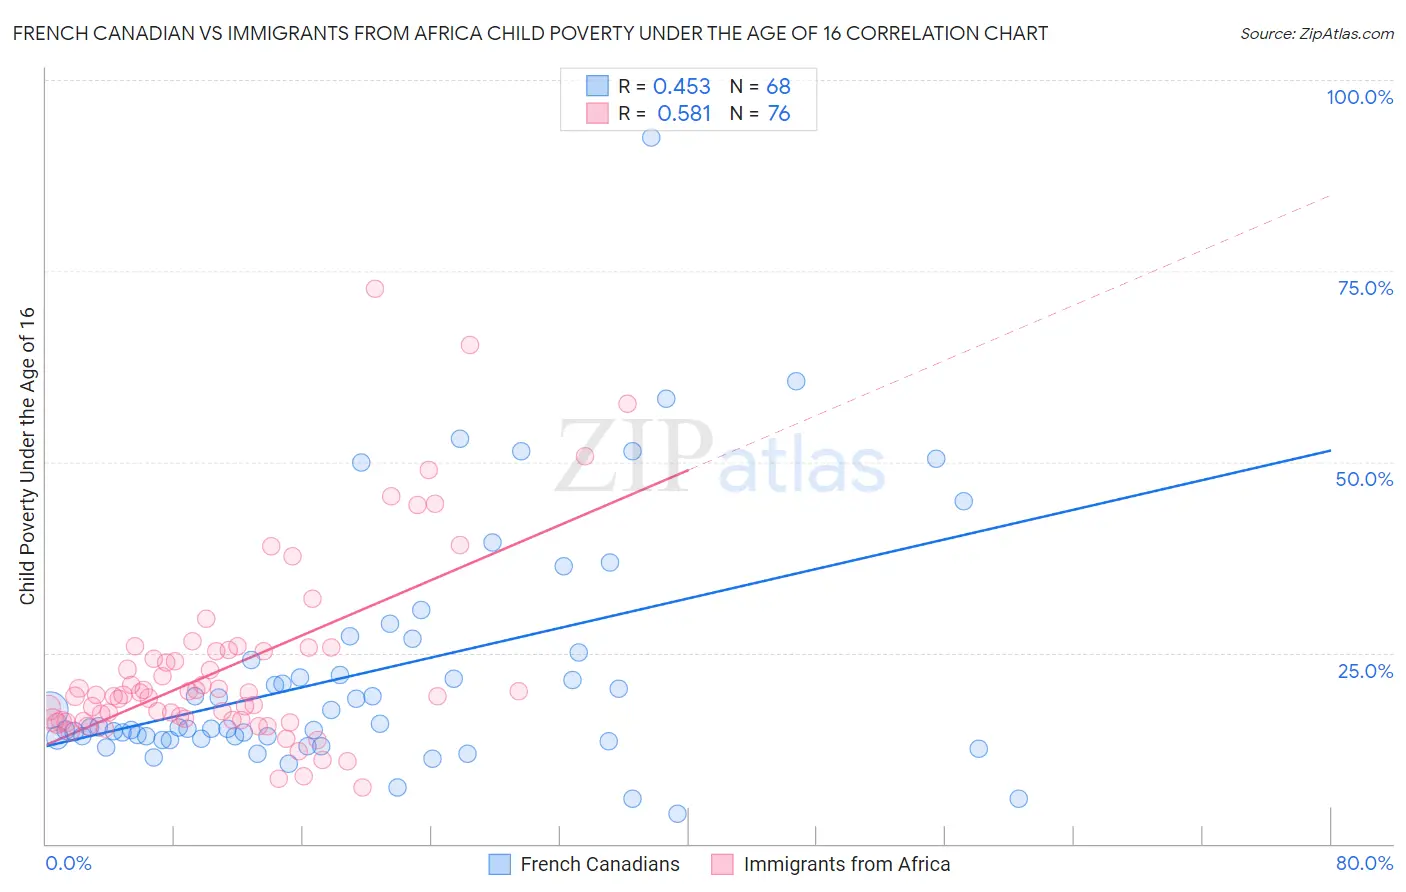 French Canadian vs Immigrants from Africa Child Poverty Under the Age of 16